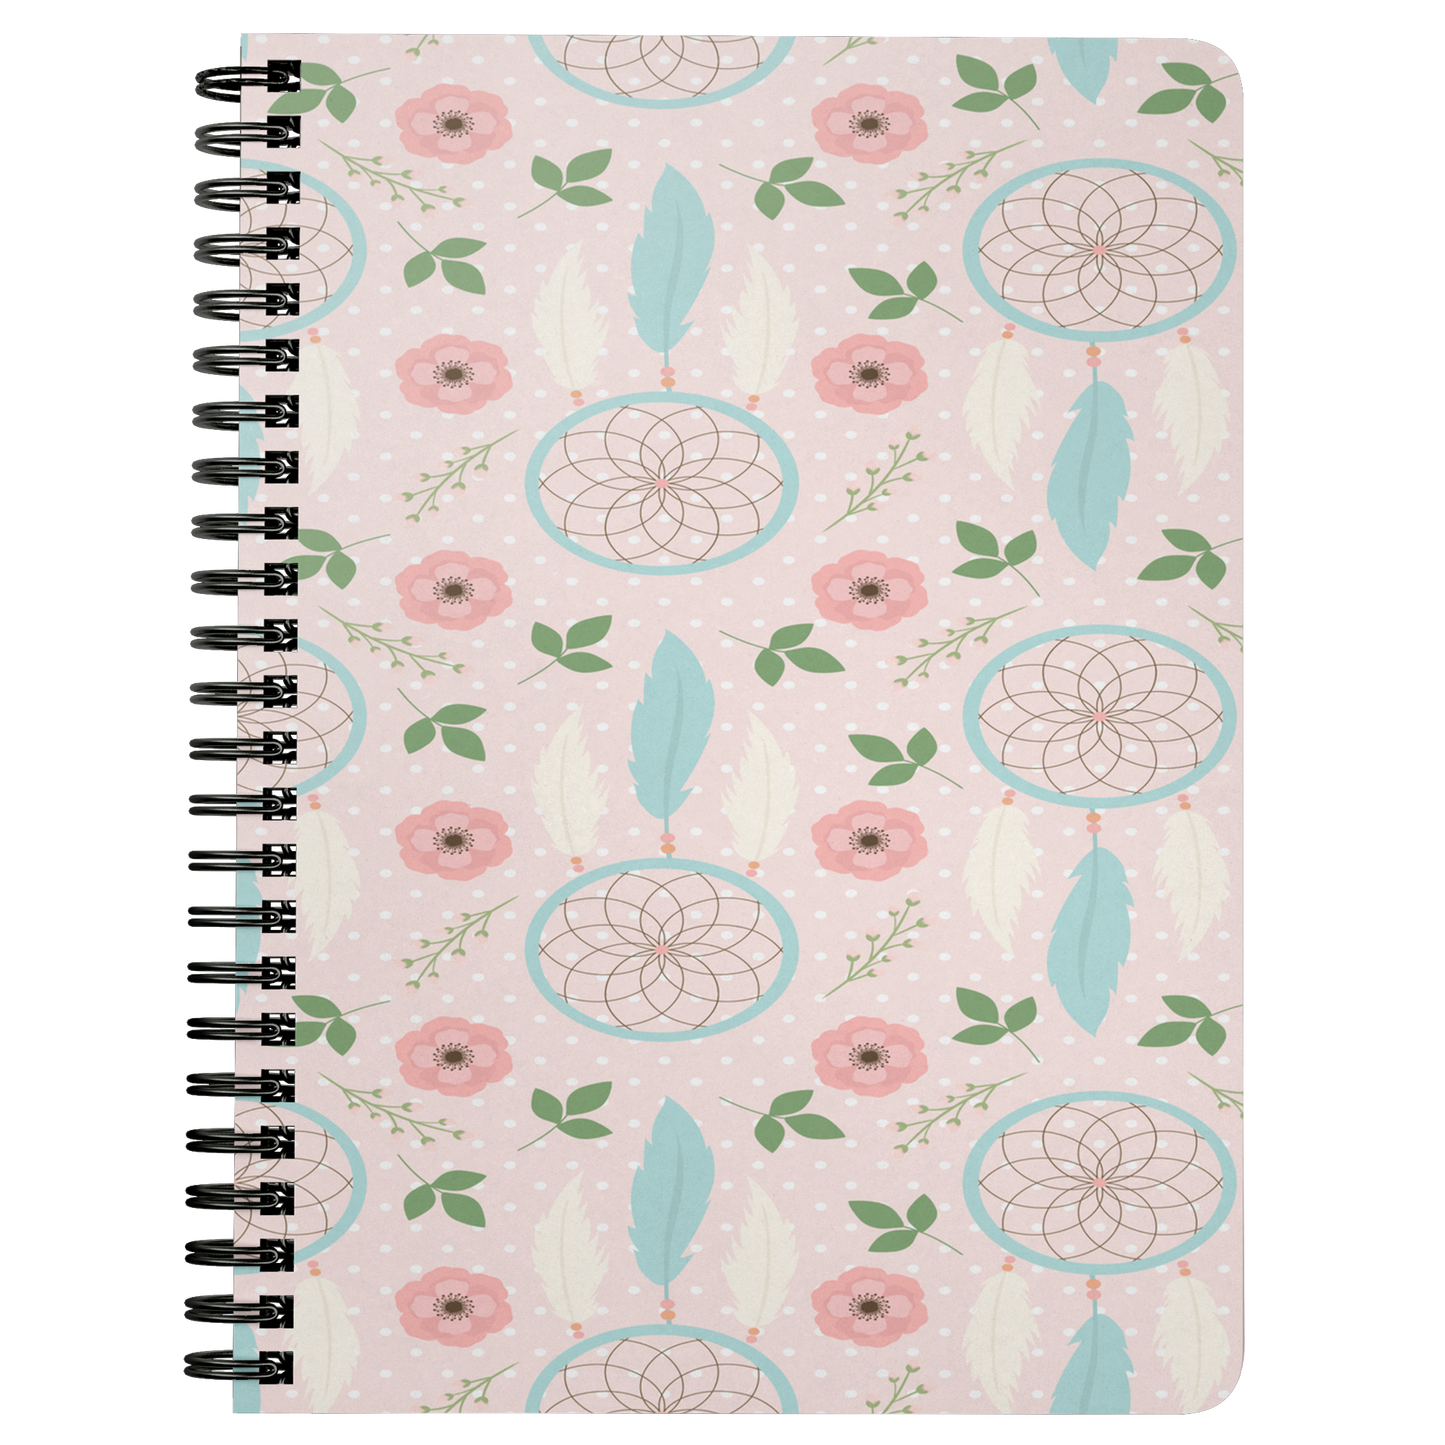 BoHo Journal Daily Notebook Diary Spiraled Lined Custom Writing Book Daybook Journal